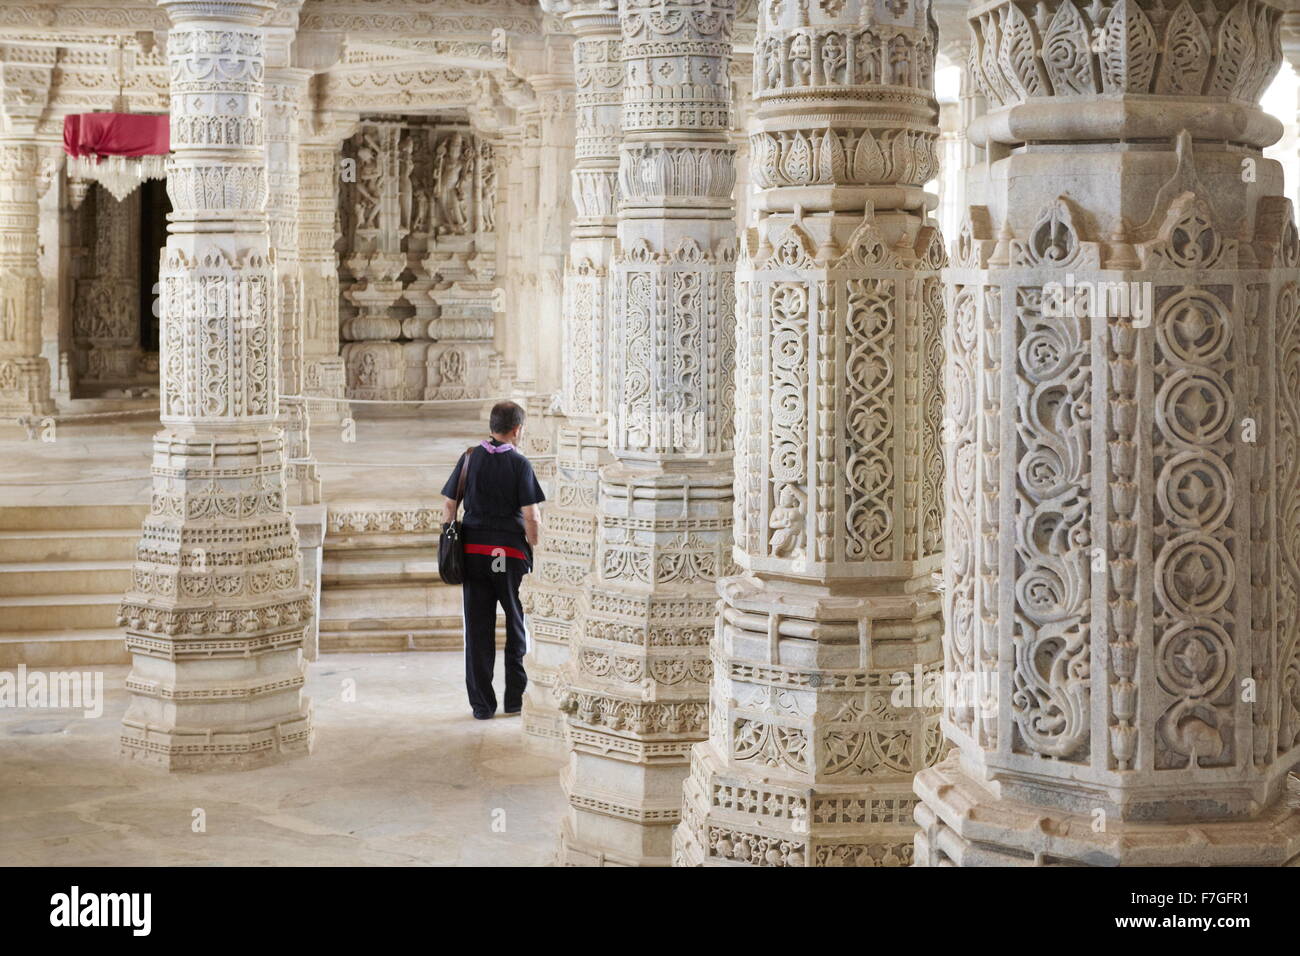 Carved pillars of white marble in the Jain Temple, Ranakpur, Rajasthan, India Stock Photo